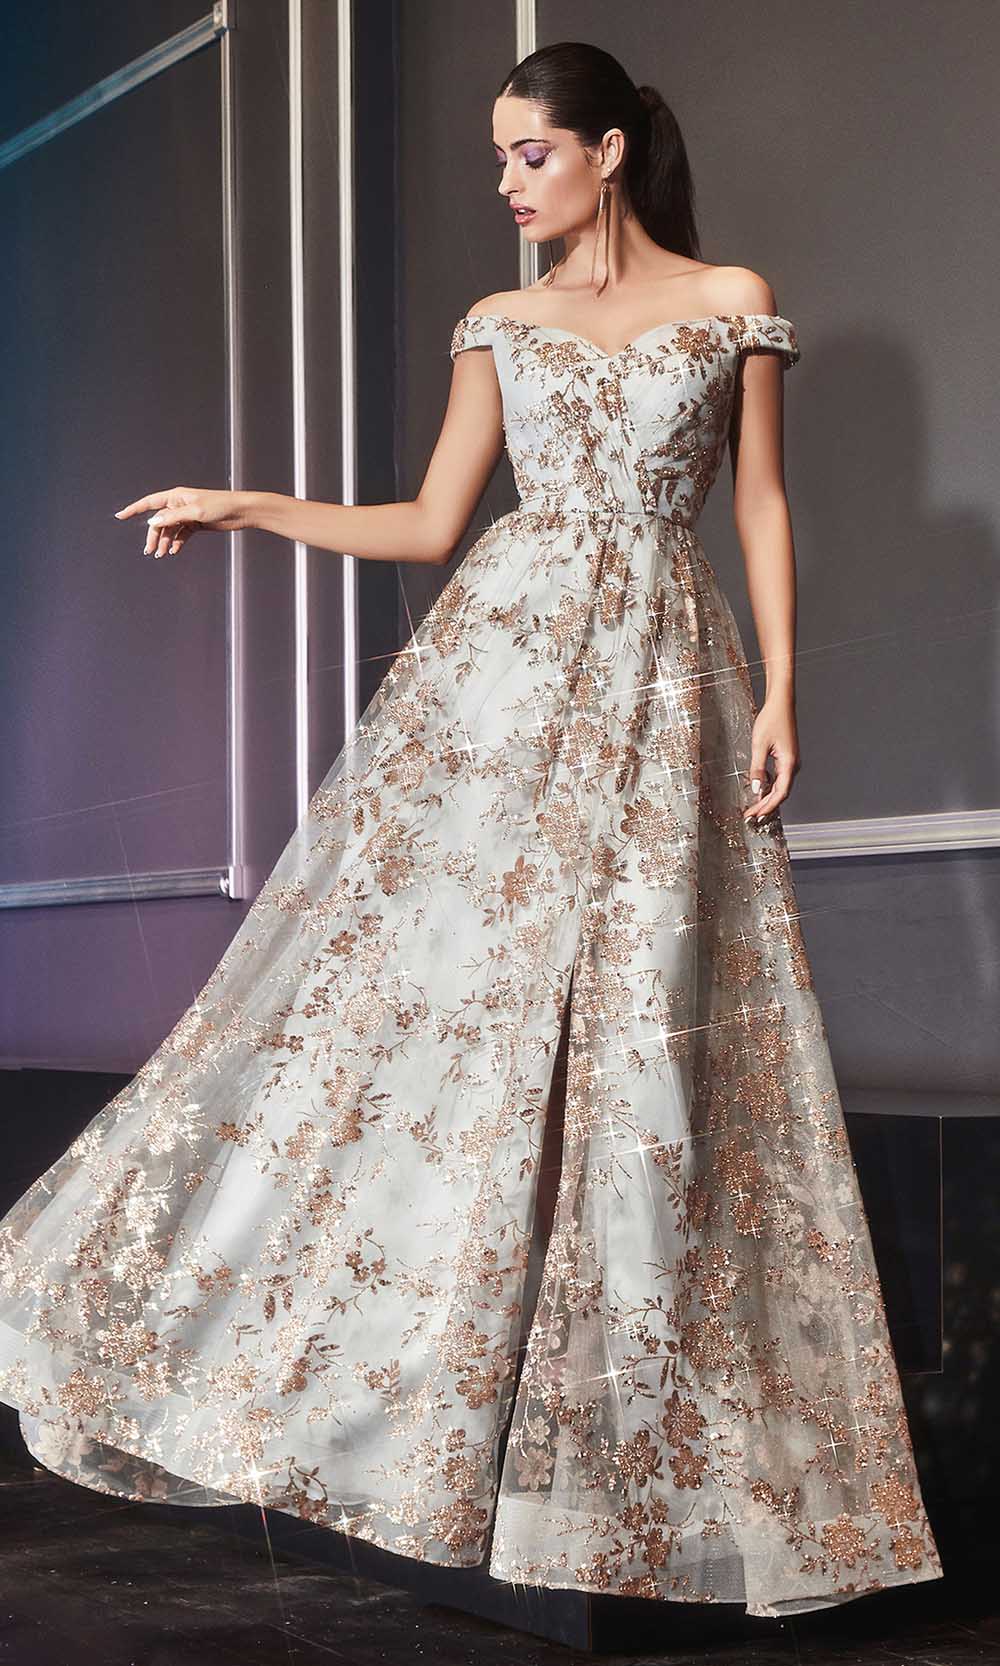 Ladivine - CB069 Embellished Print Off Shoulder Gown In Champagne and Gold